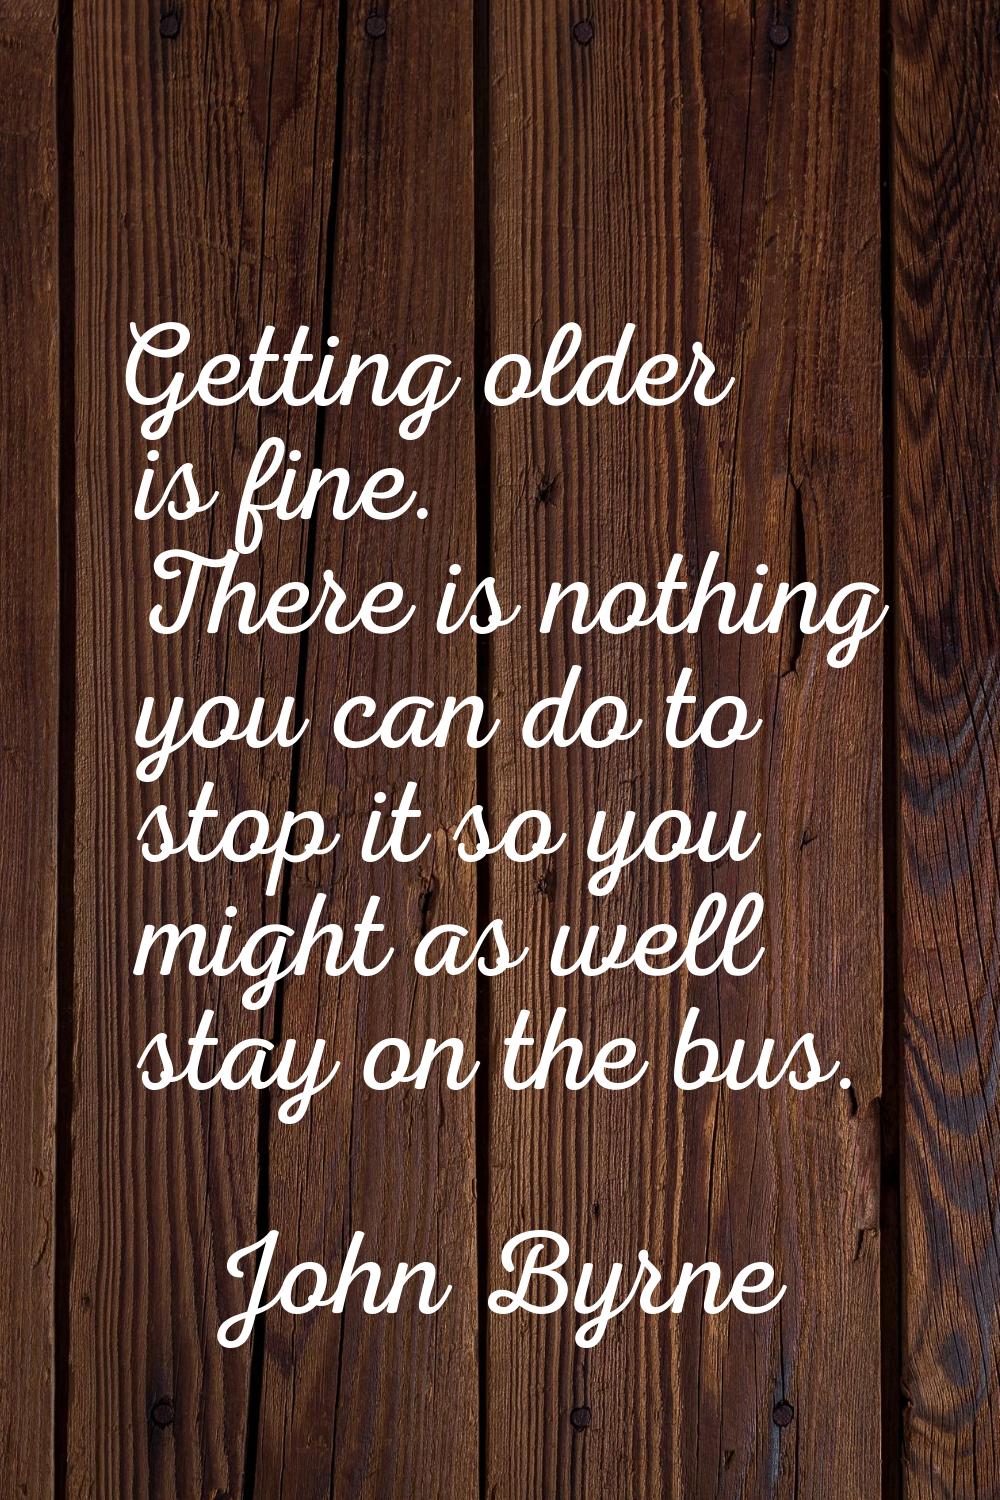 Getting older is fine. There is nothing you can do to stop it so you might as well stay on the bus.